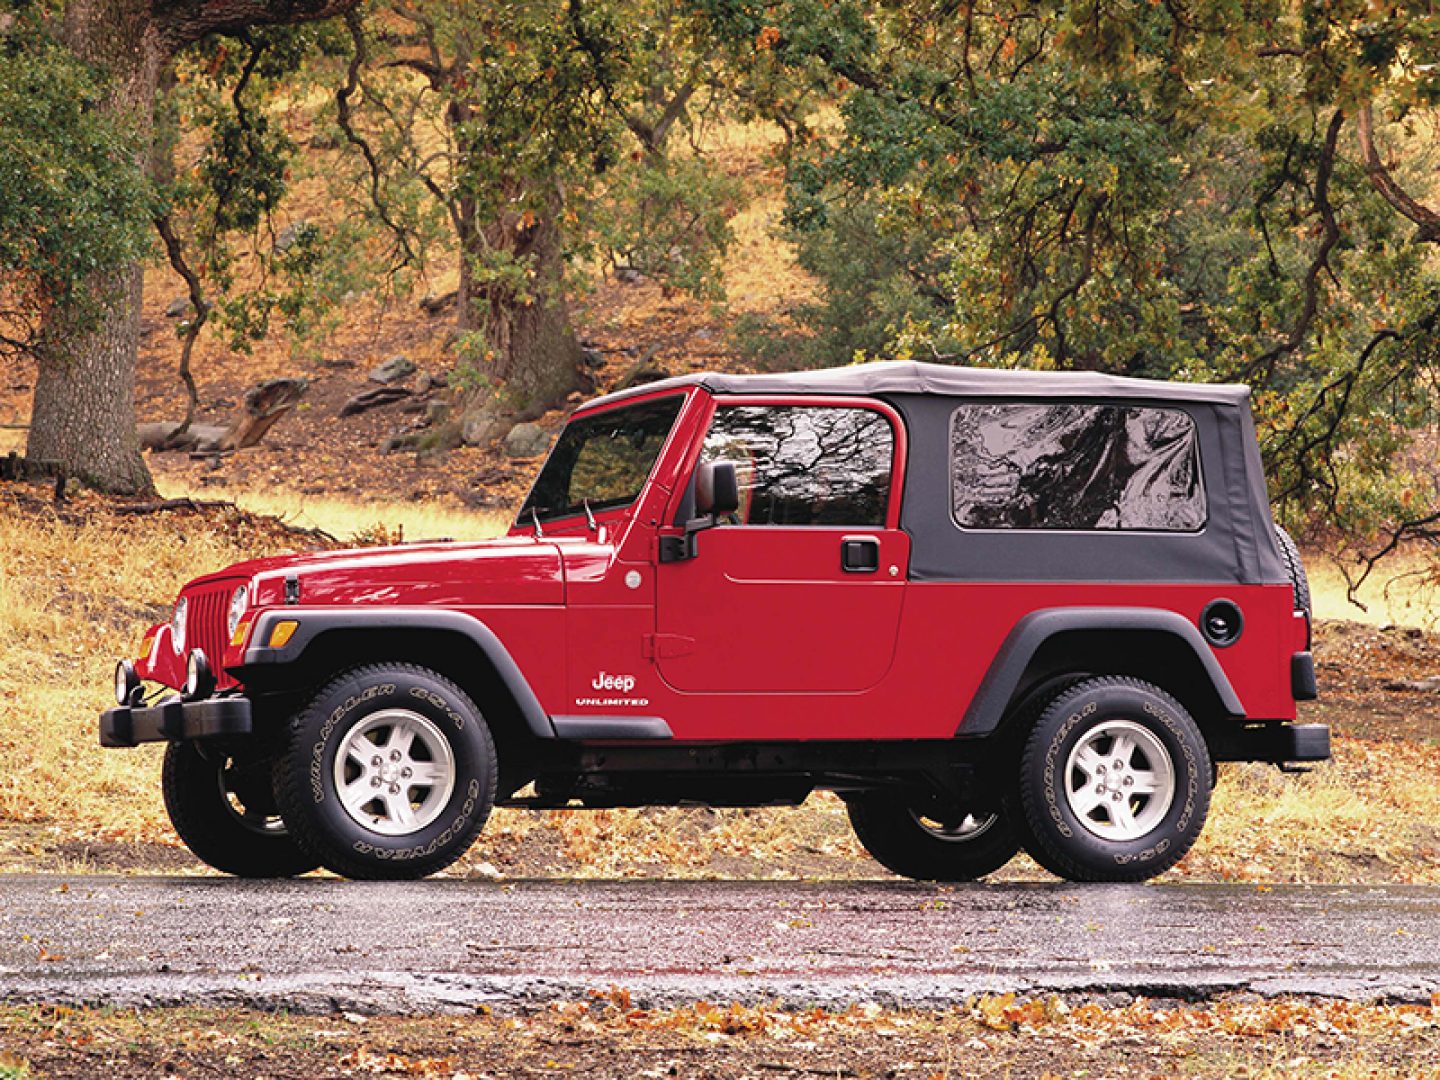 Jeep® History in the 2000s